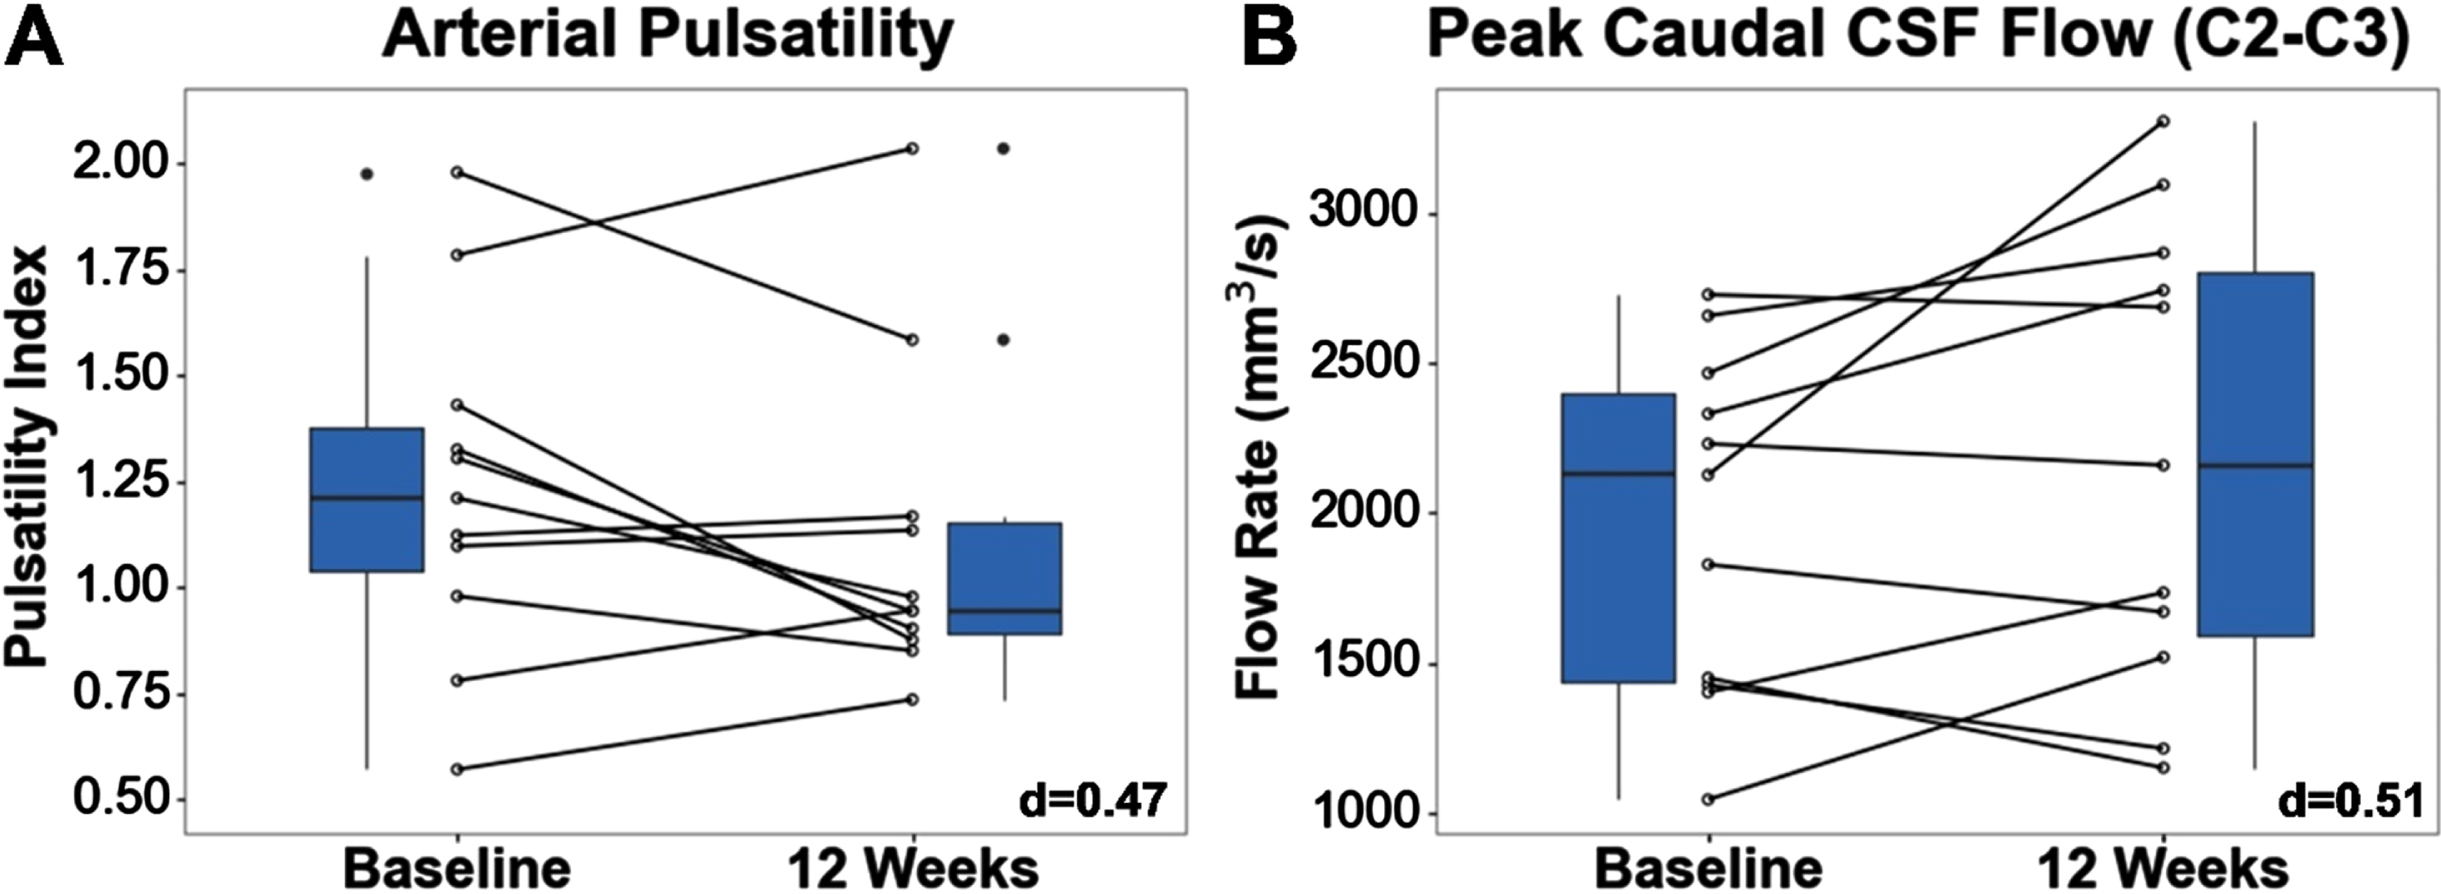 (A) Lower arterial pulsatility suggests reduced peripheral vascular resistance. (B) Higher cranio-caudal peak CSF flow through C2-C3 SS suggests improved circulation. Effect sizes are shown in the bottom right corner of each boxplot.